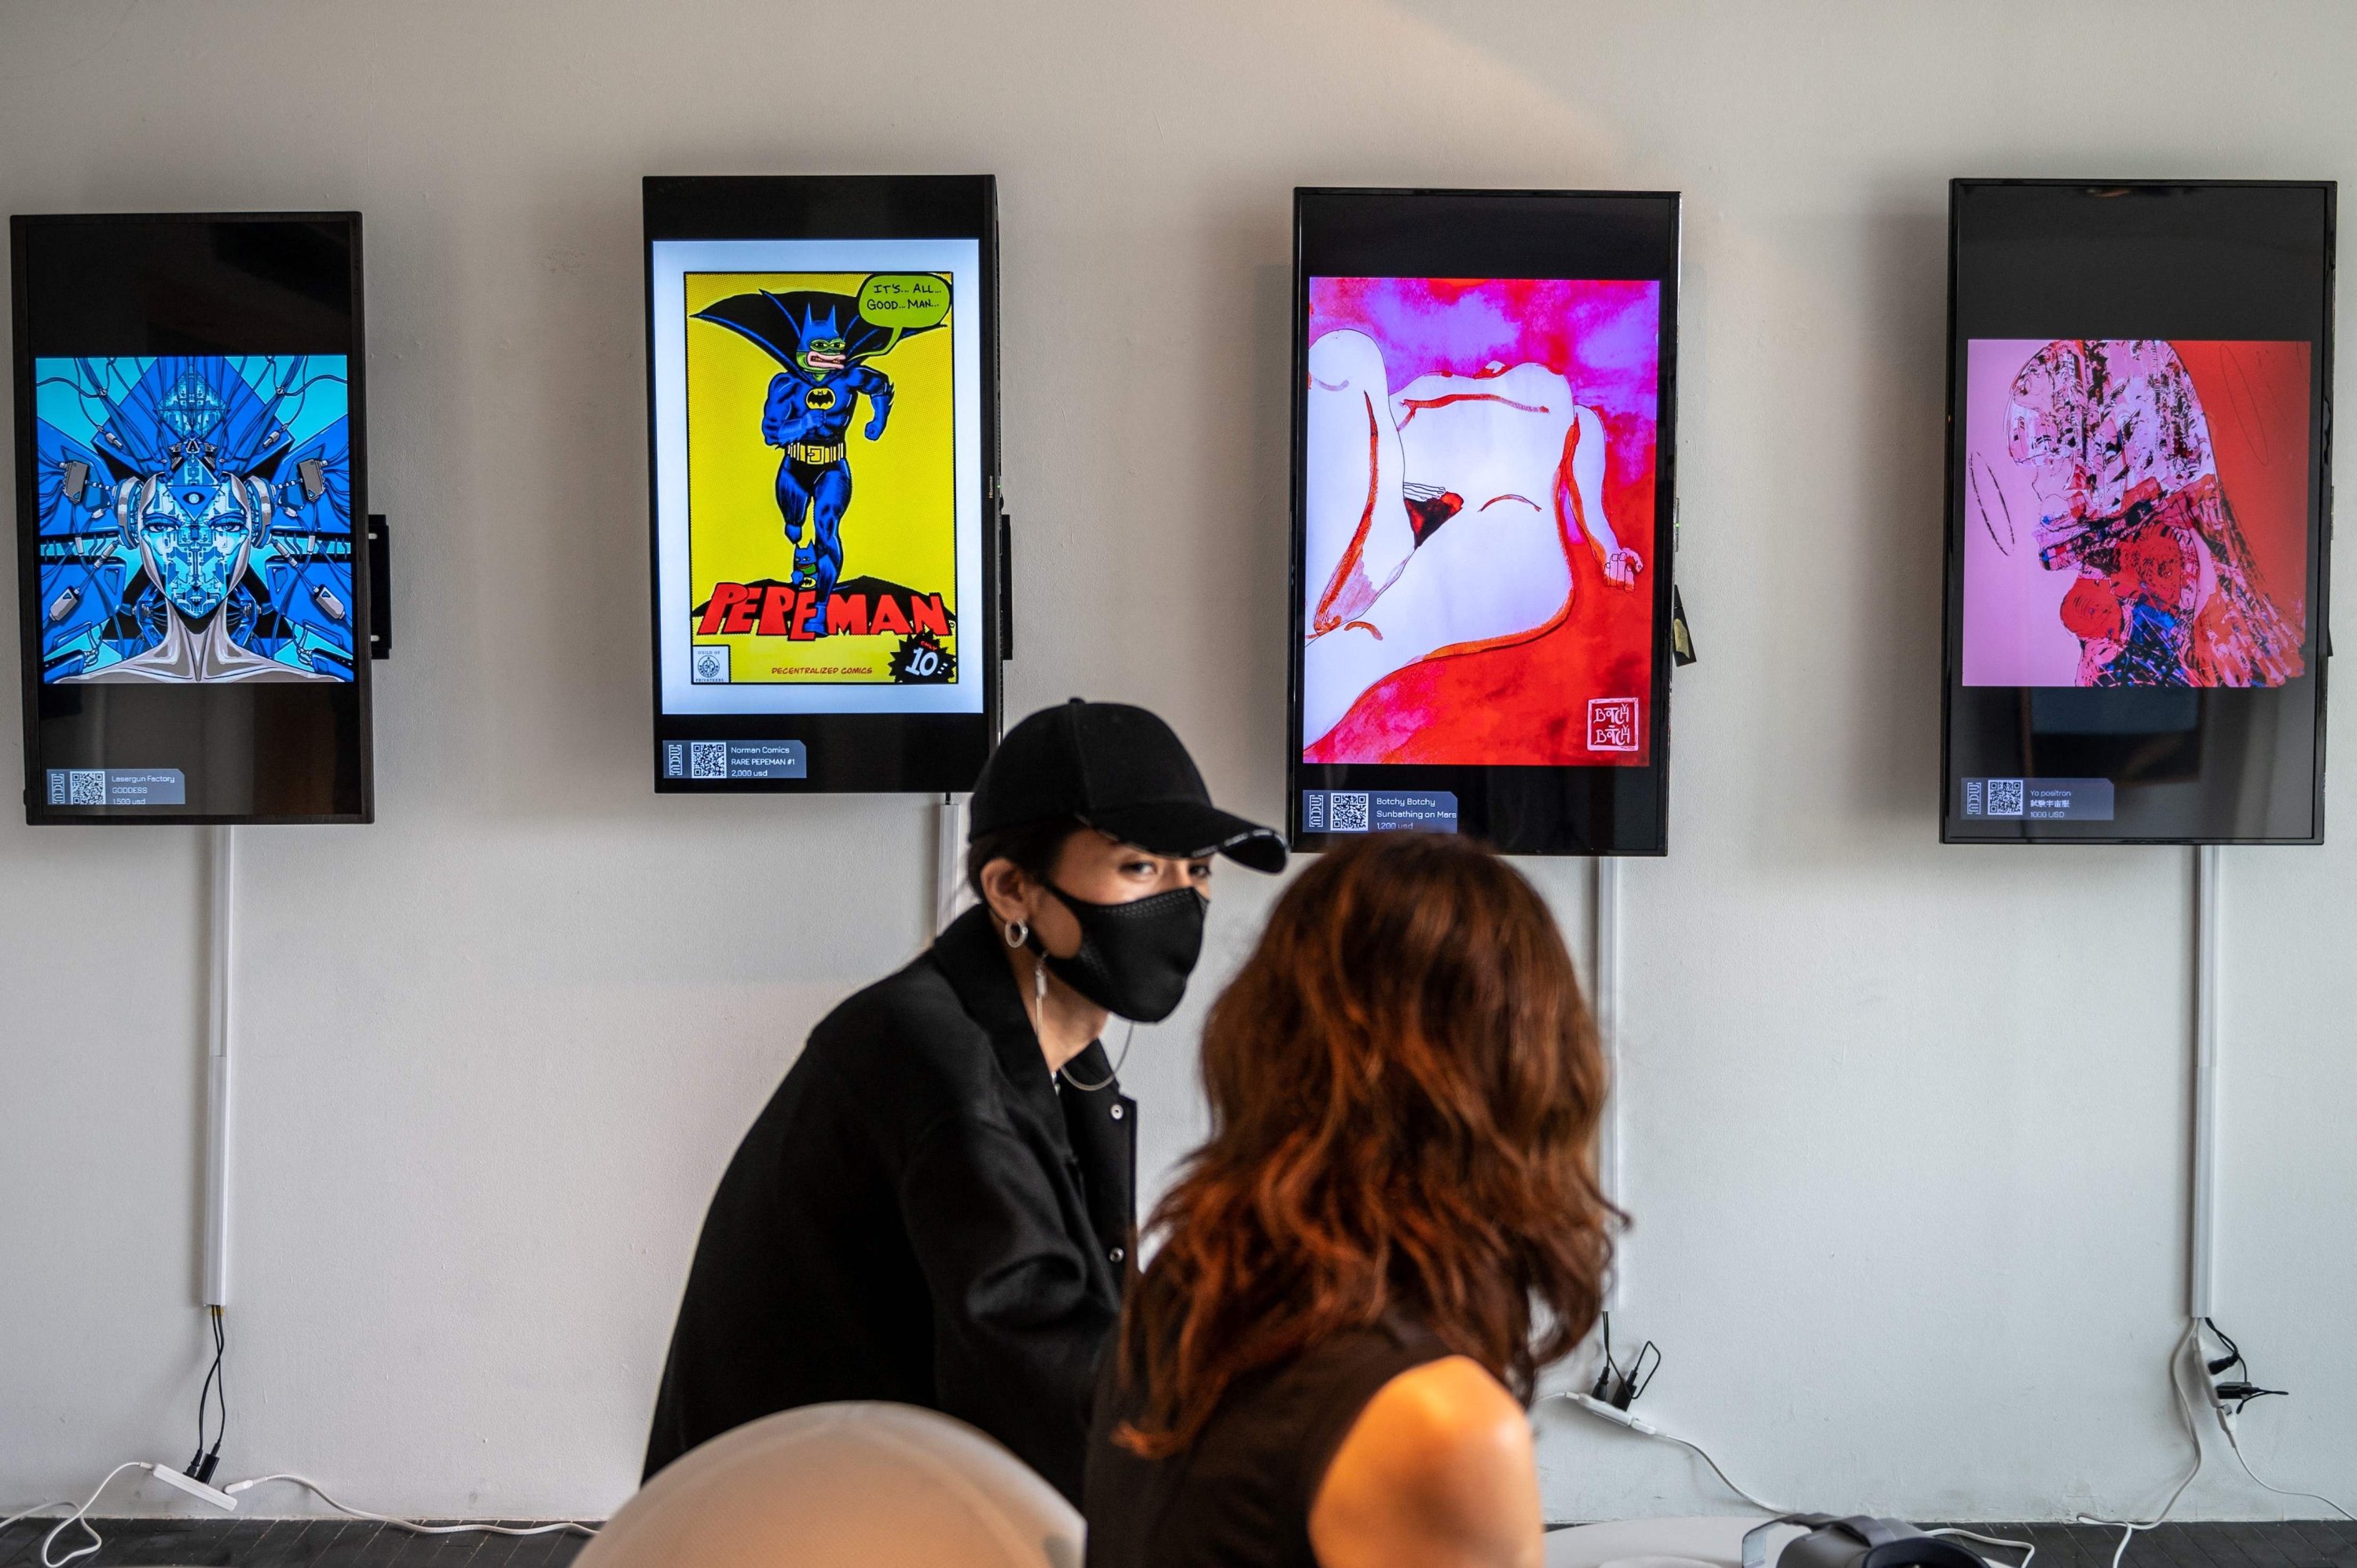 Tokyo launches 1st crypto art exhibition with tattoos, NFTs | Daily Sabah